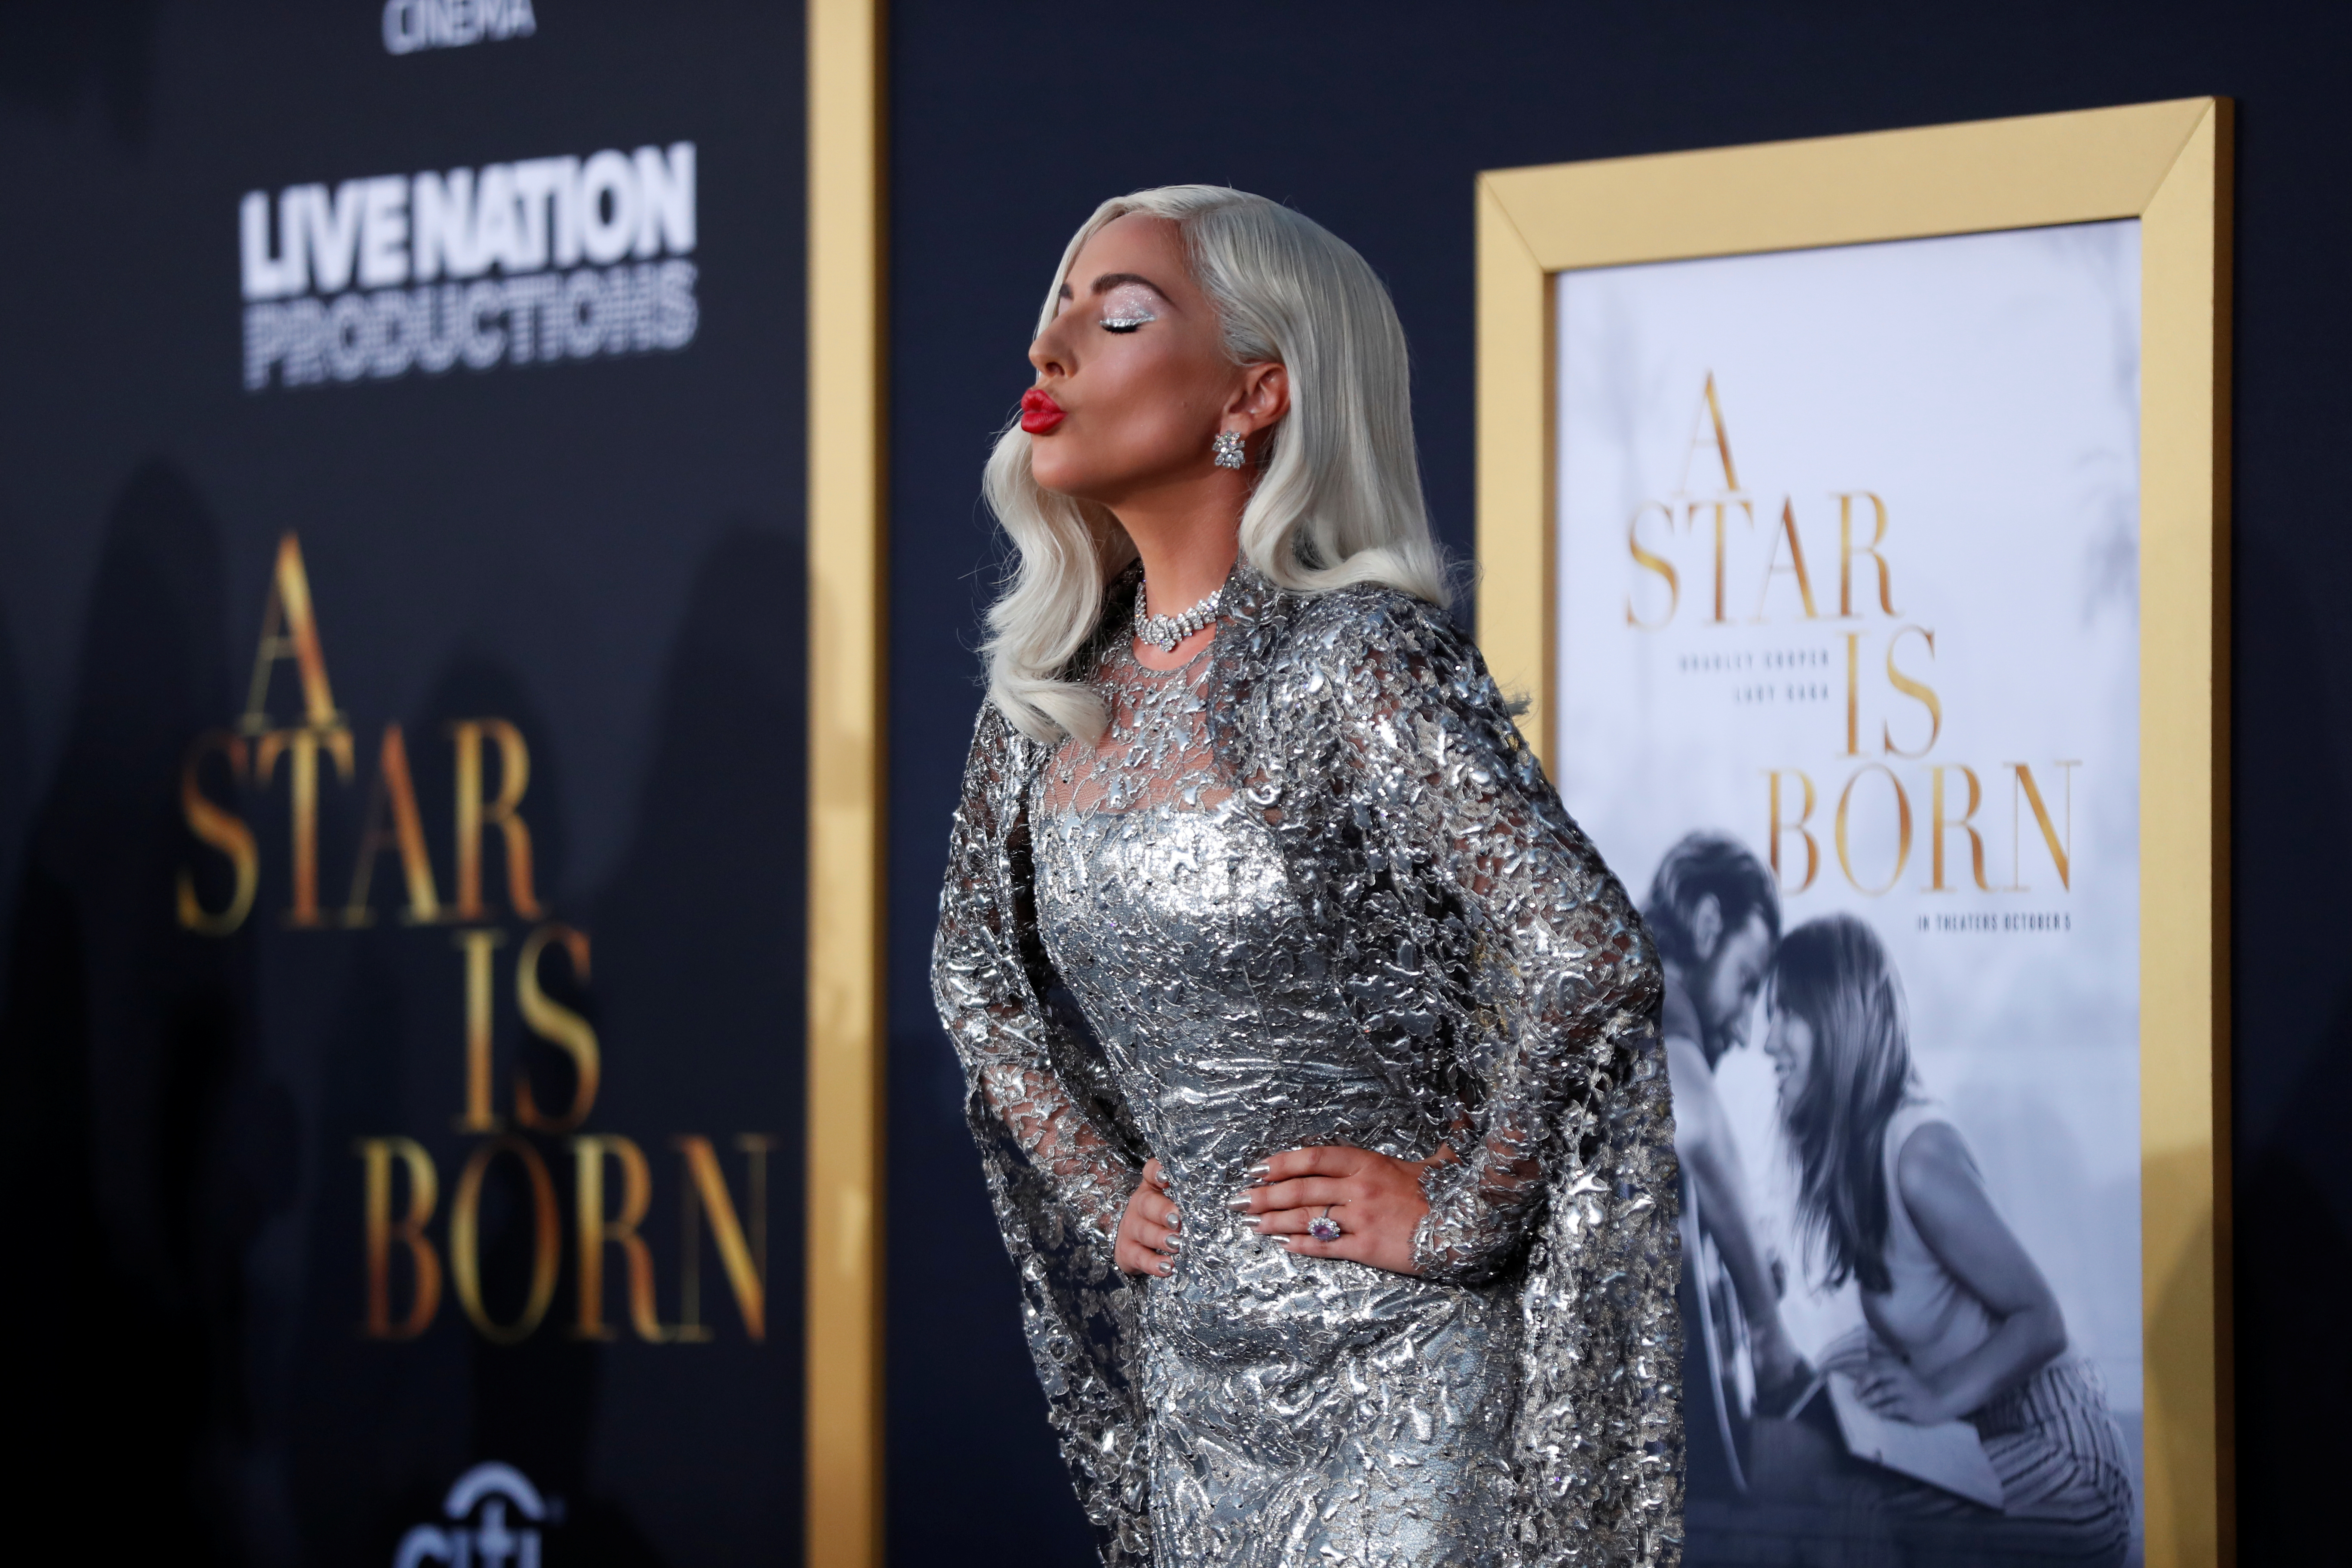 Cast member Lady Gaga arrives for the premiere of the movie “A Star Is Born” in Los Angeles, California, U.S. September 24, 2018. REUTERS/Mario Anzuoni